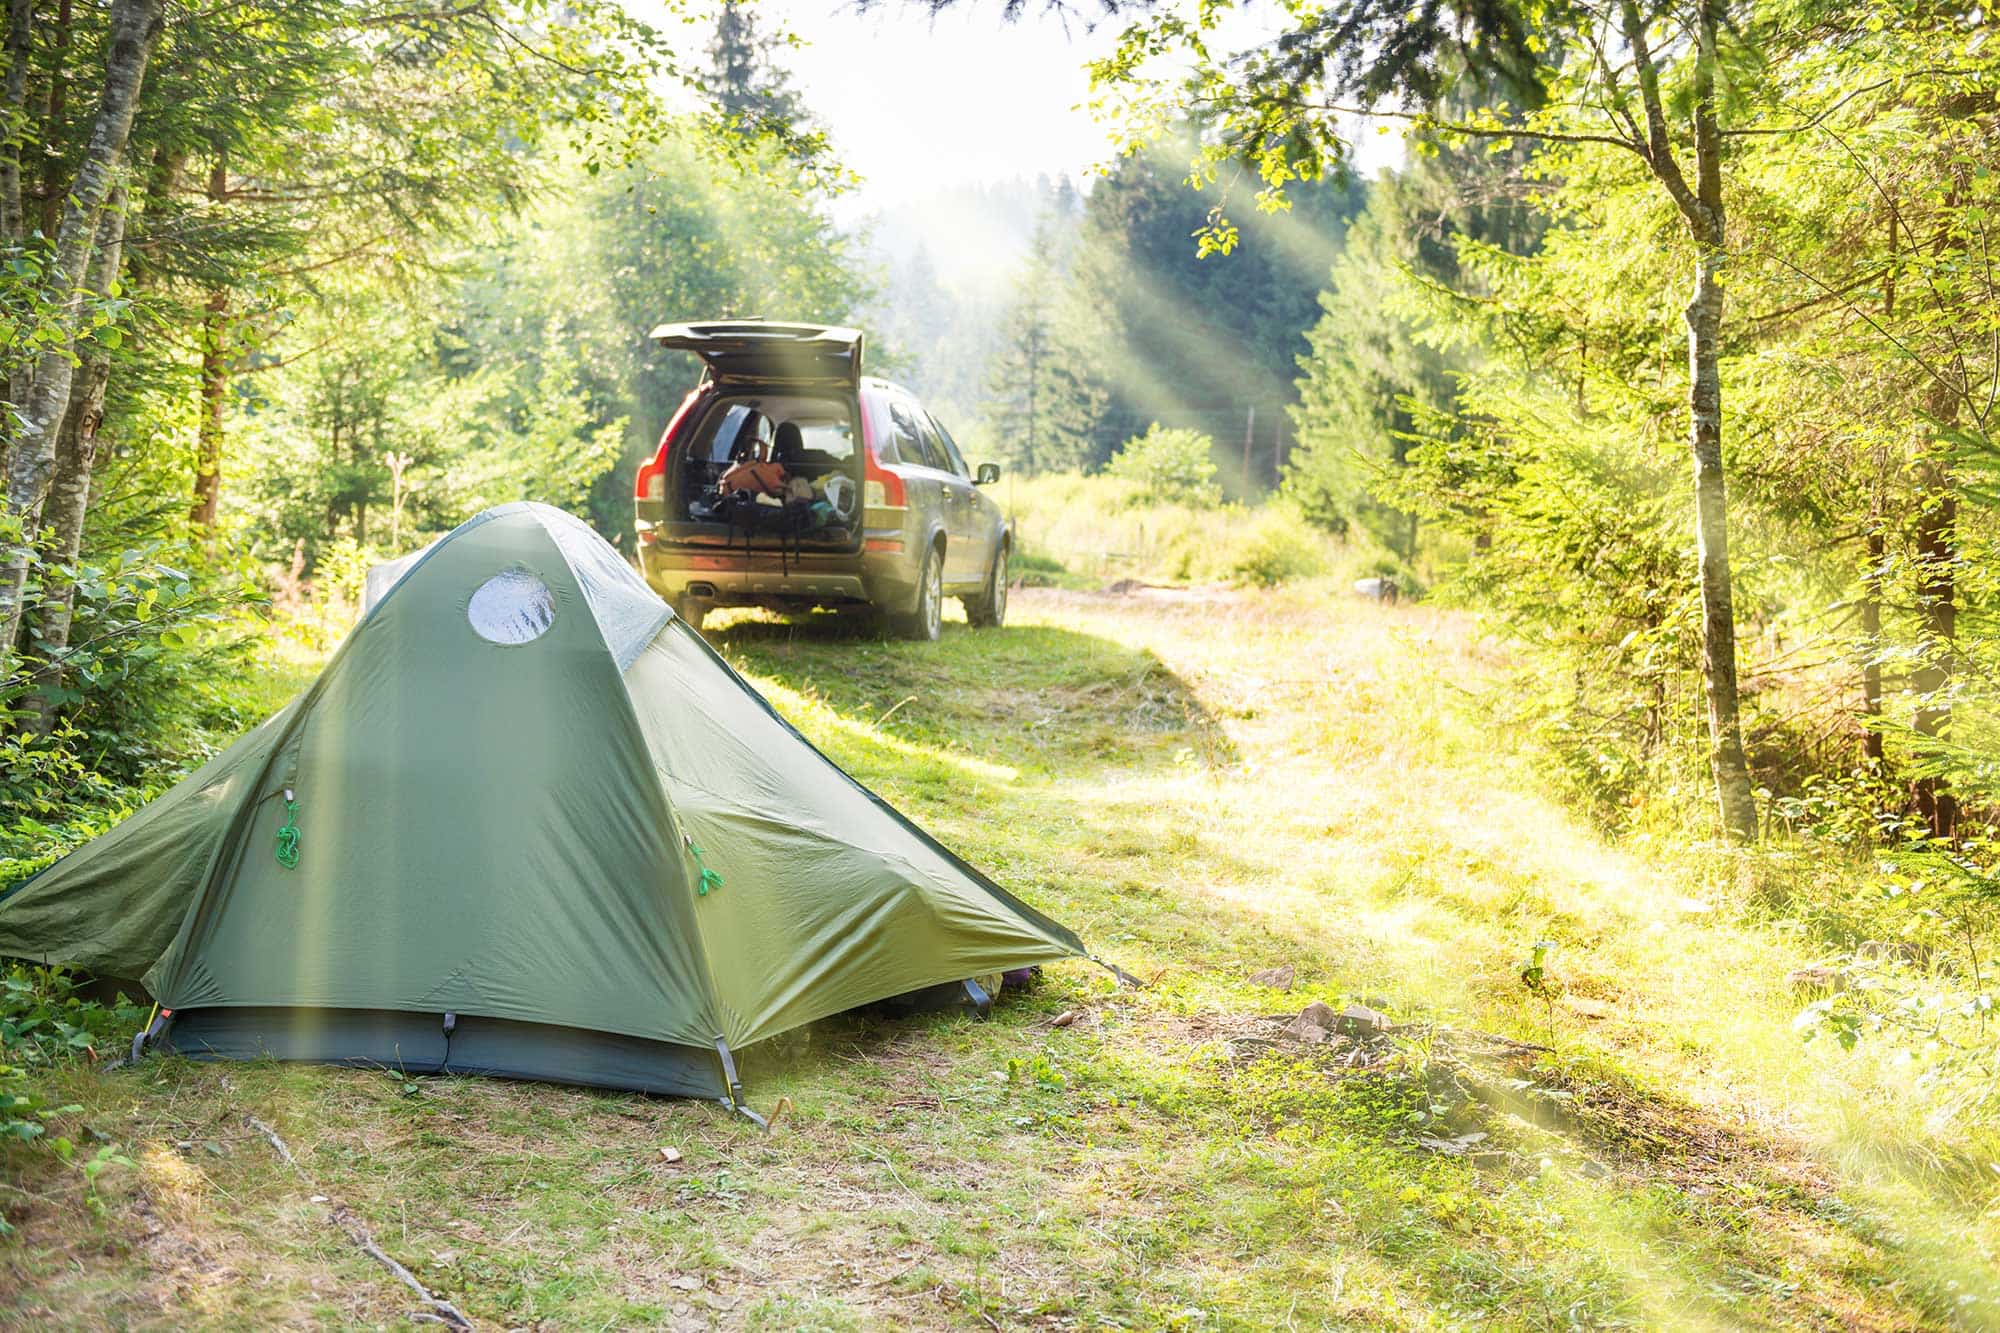 Minimalist Camping - Essential Gear for a Simplified Outdoor